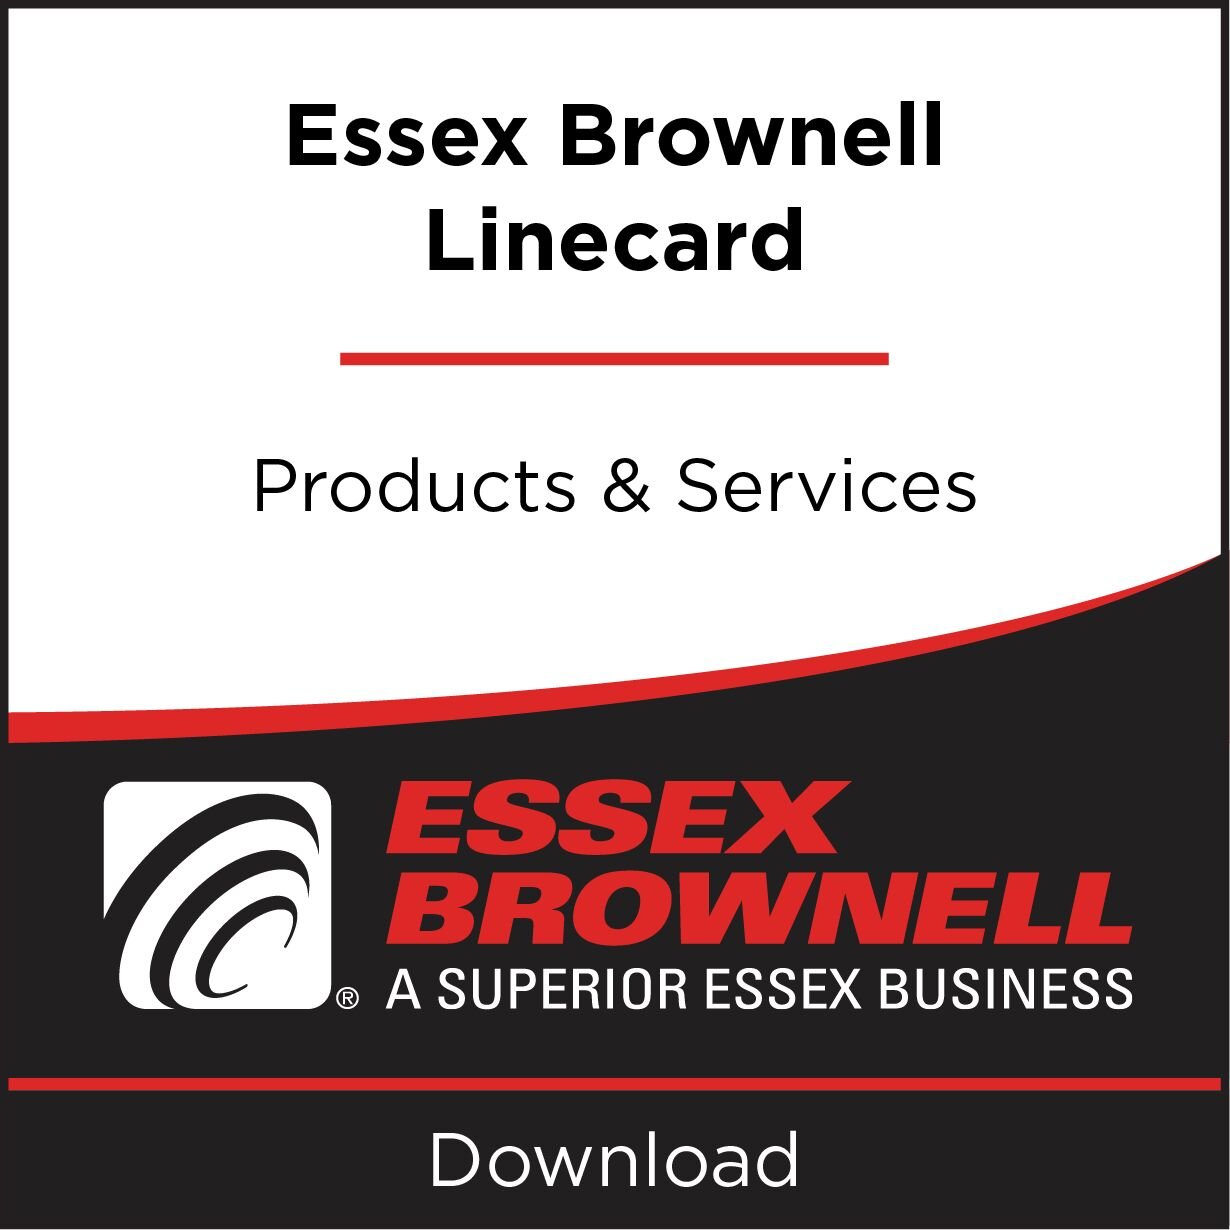 Essex Brownell Linecard (Products & Services)